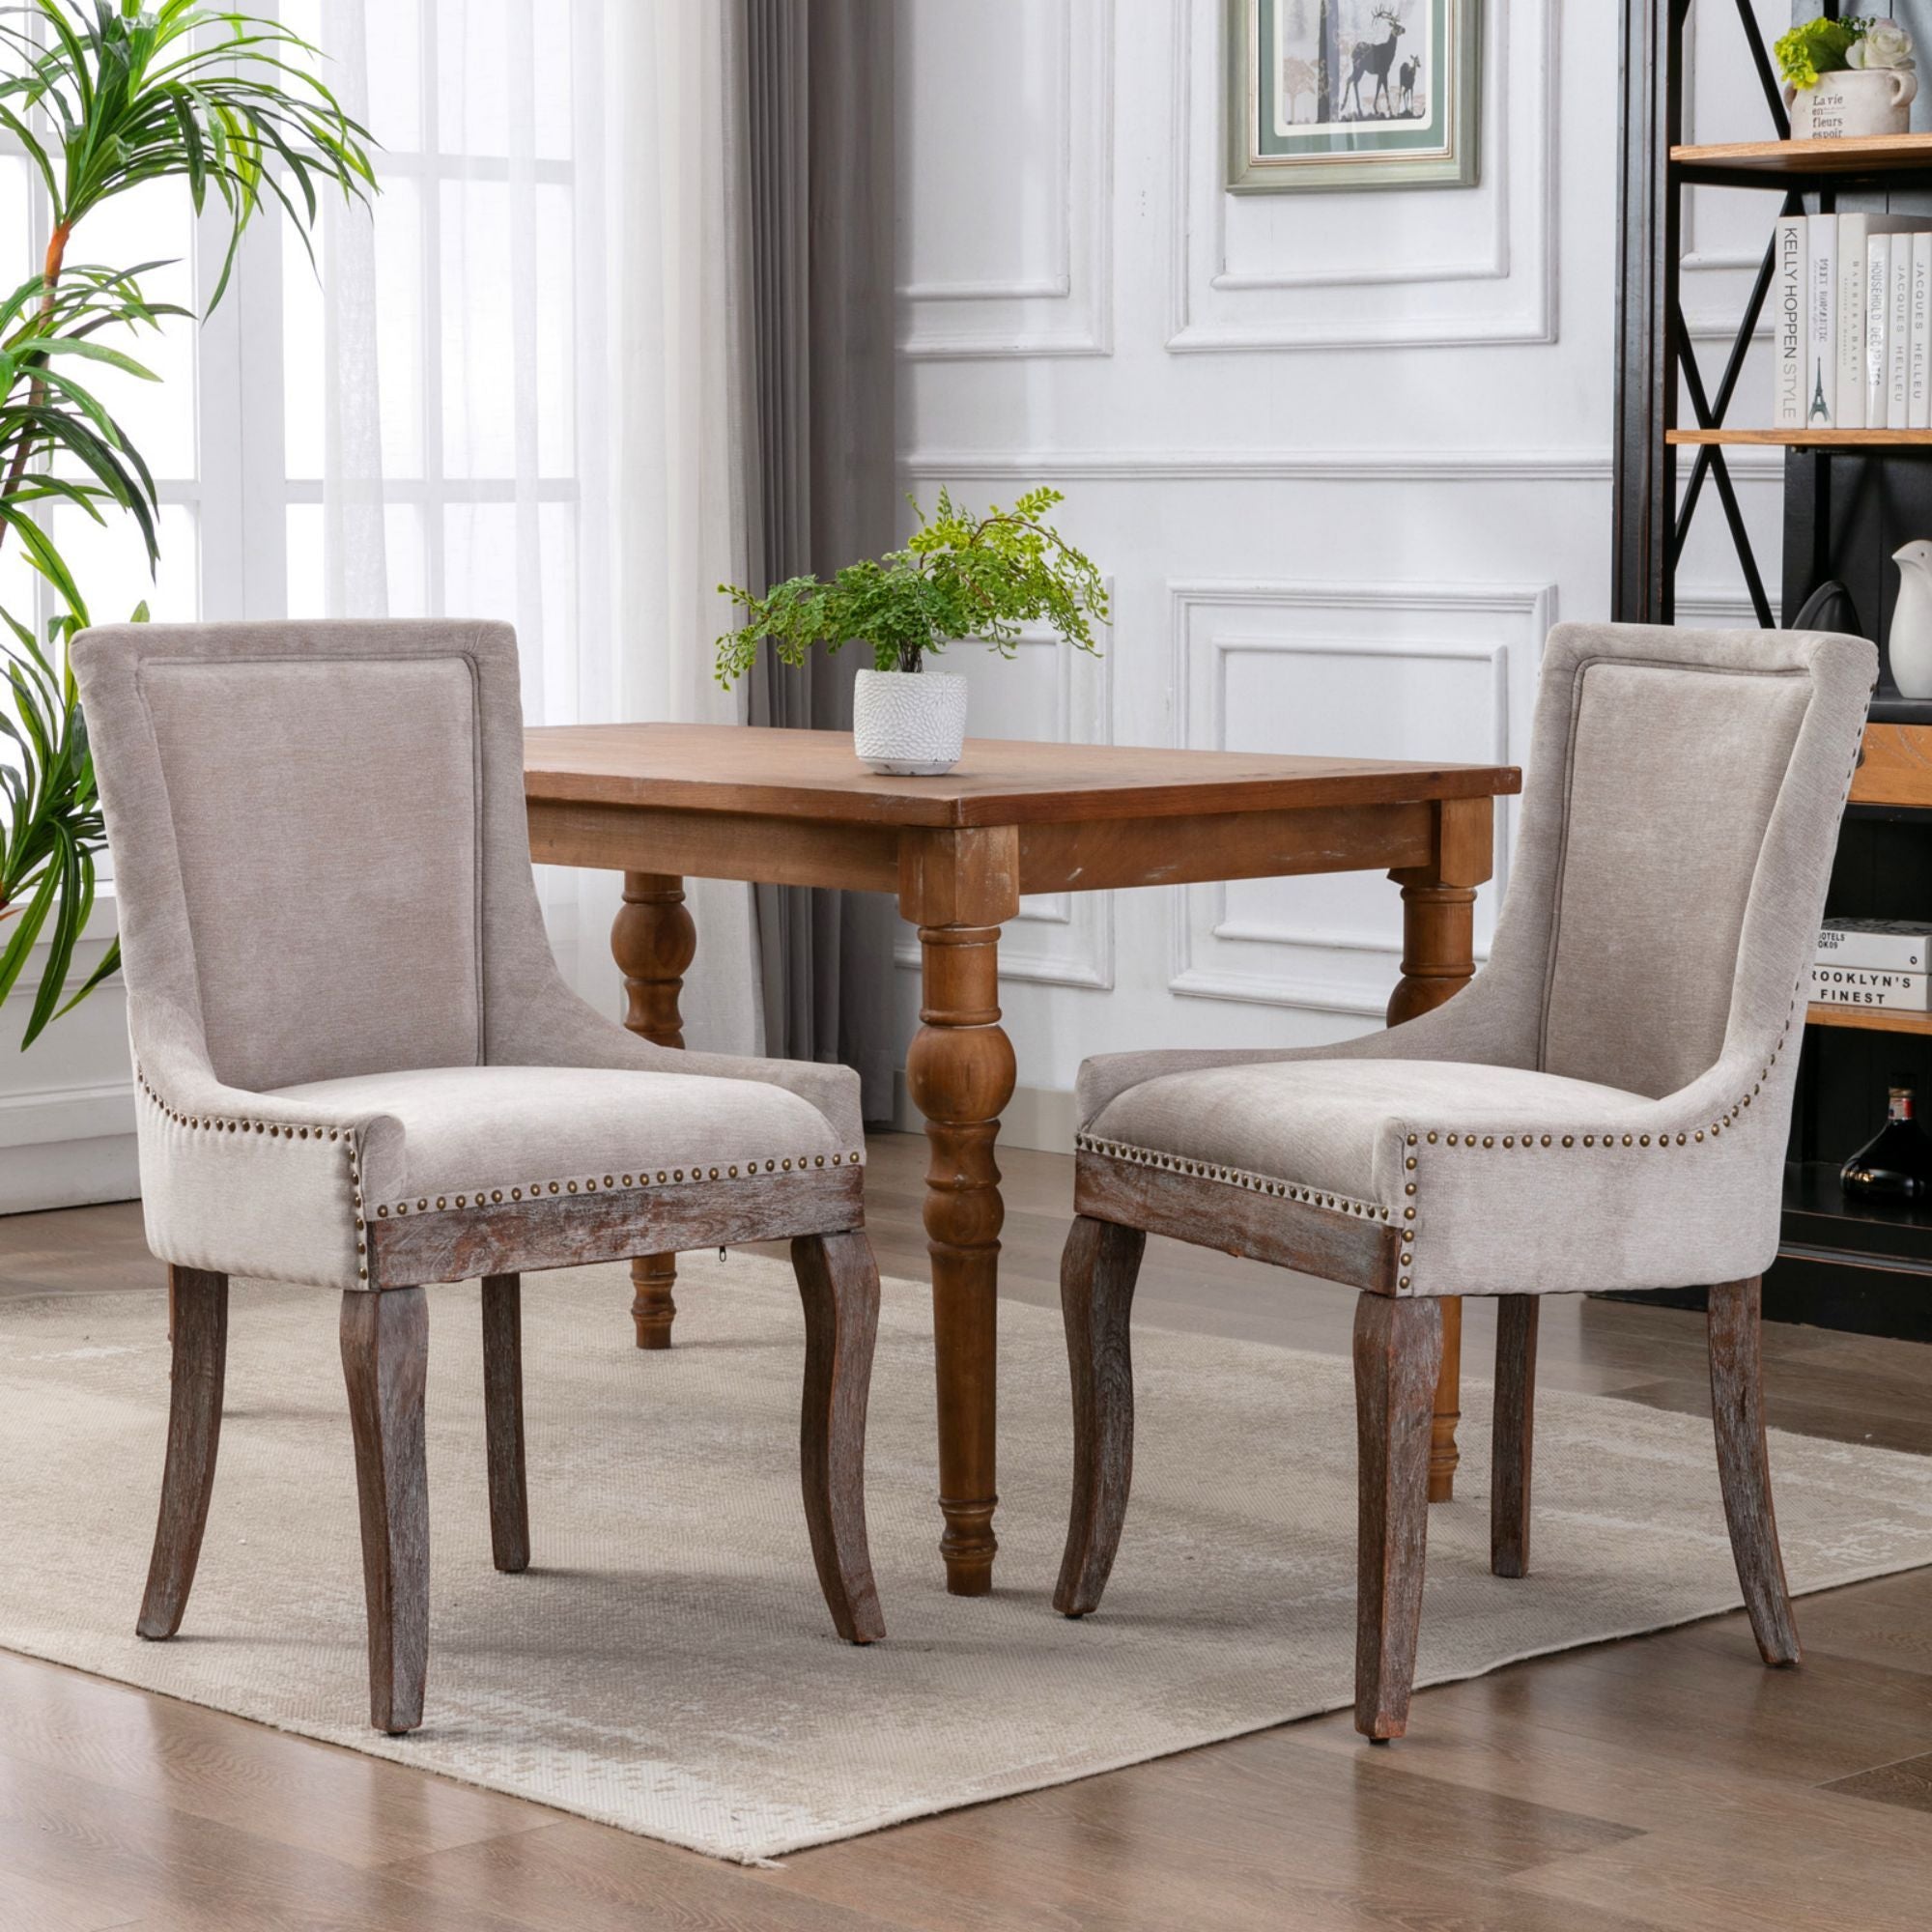 Thickened Fabric Chairs with Neutrally Toned Solid Wood Legs, Set of 2